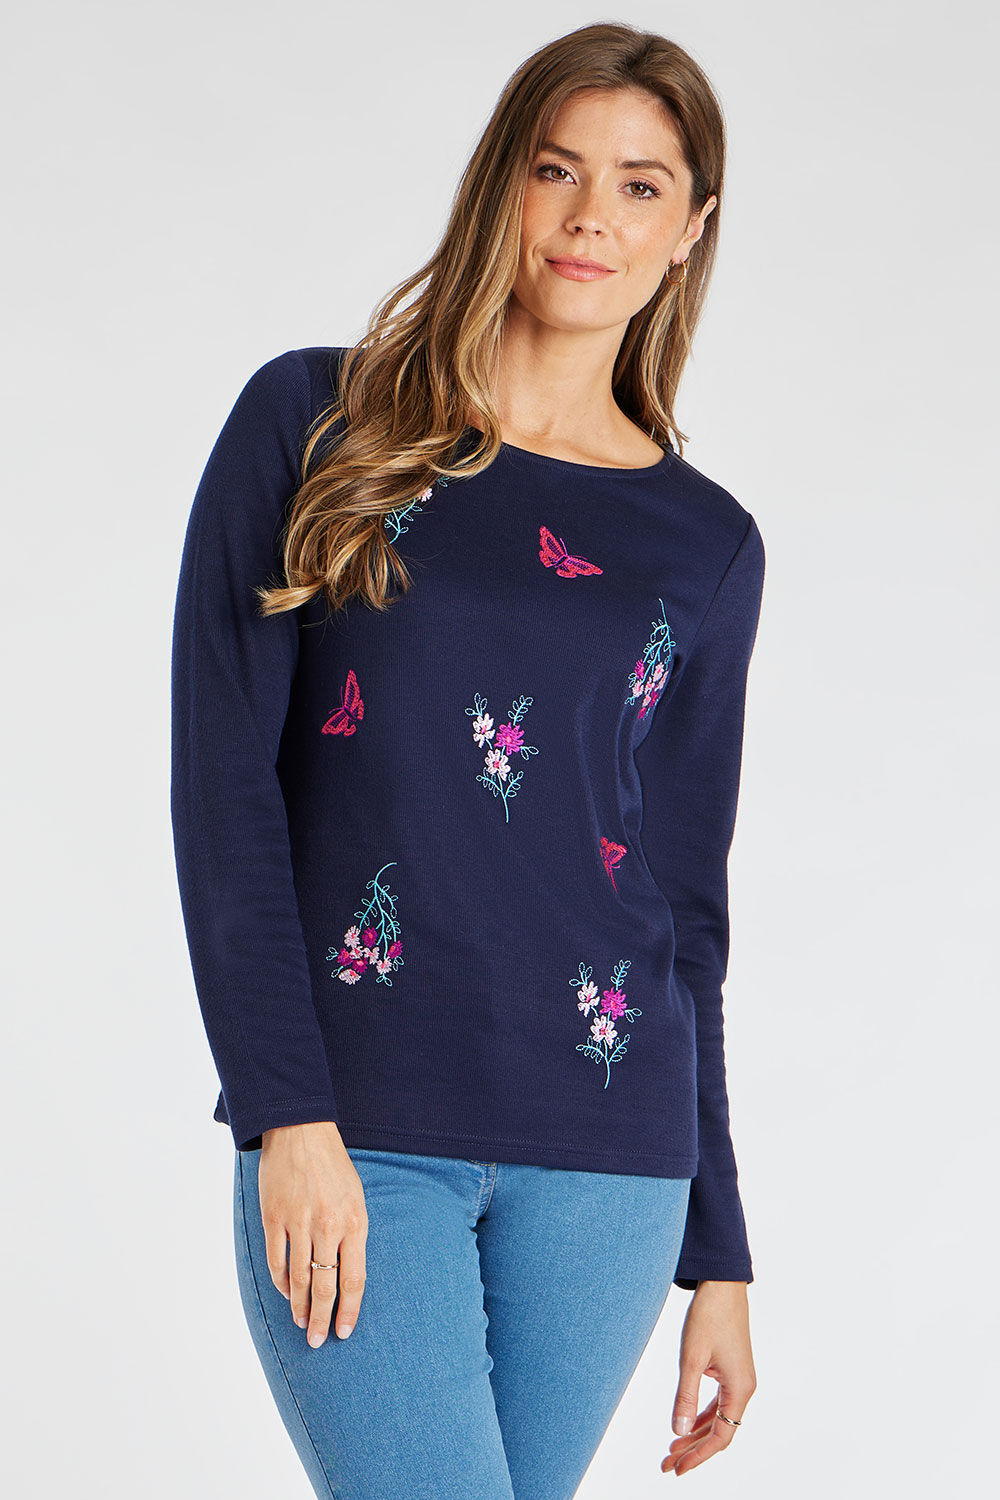 Bonmarche Navy Long Sleeve Embroidered Sprig and Butterfly Top, Size: 10